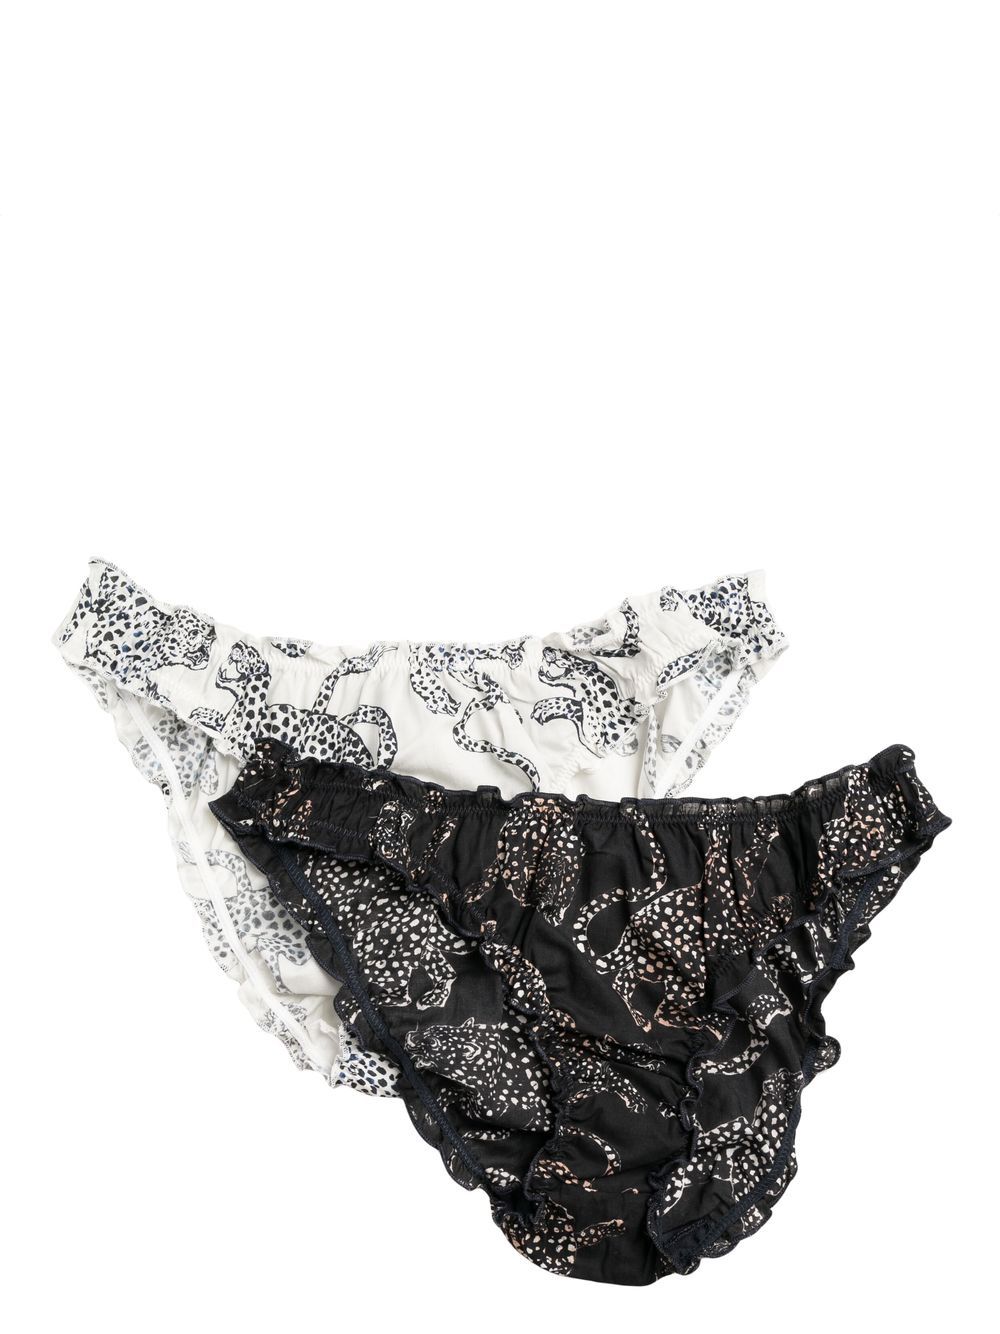 pack of two animal-print briefs